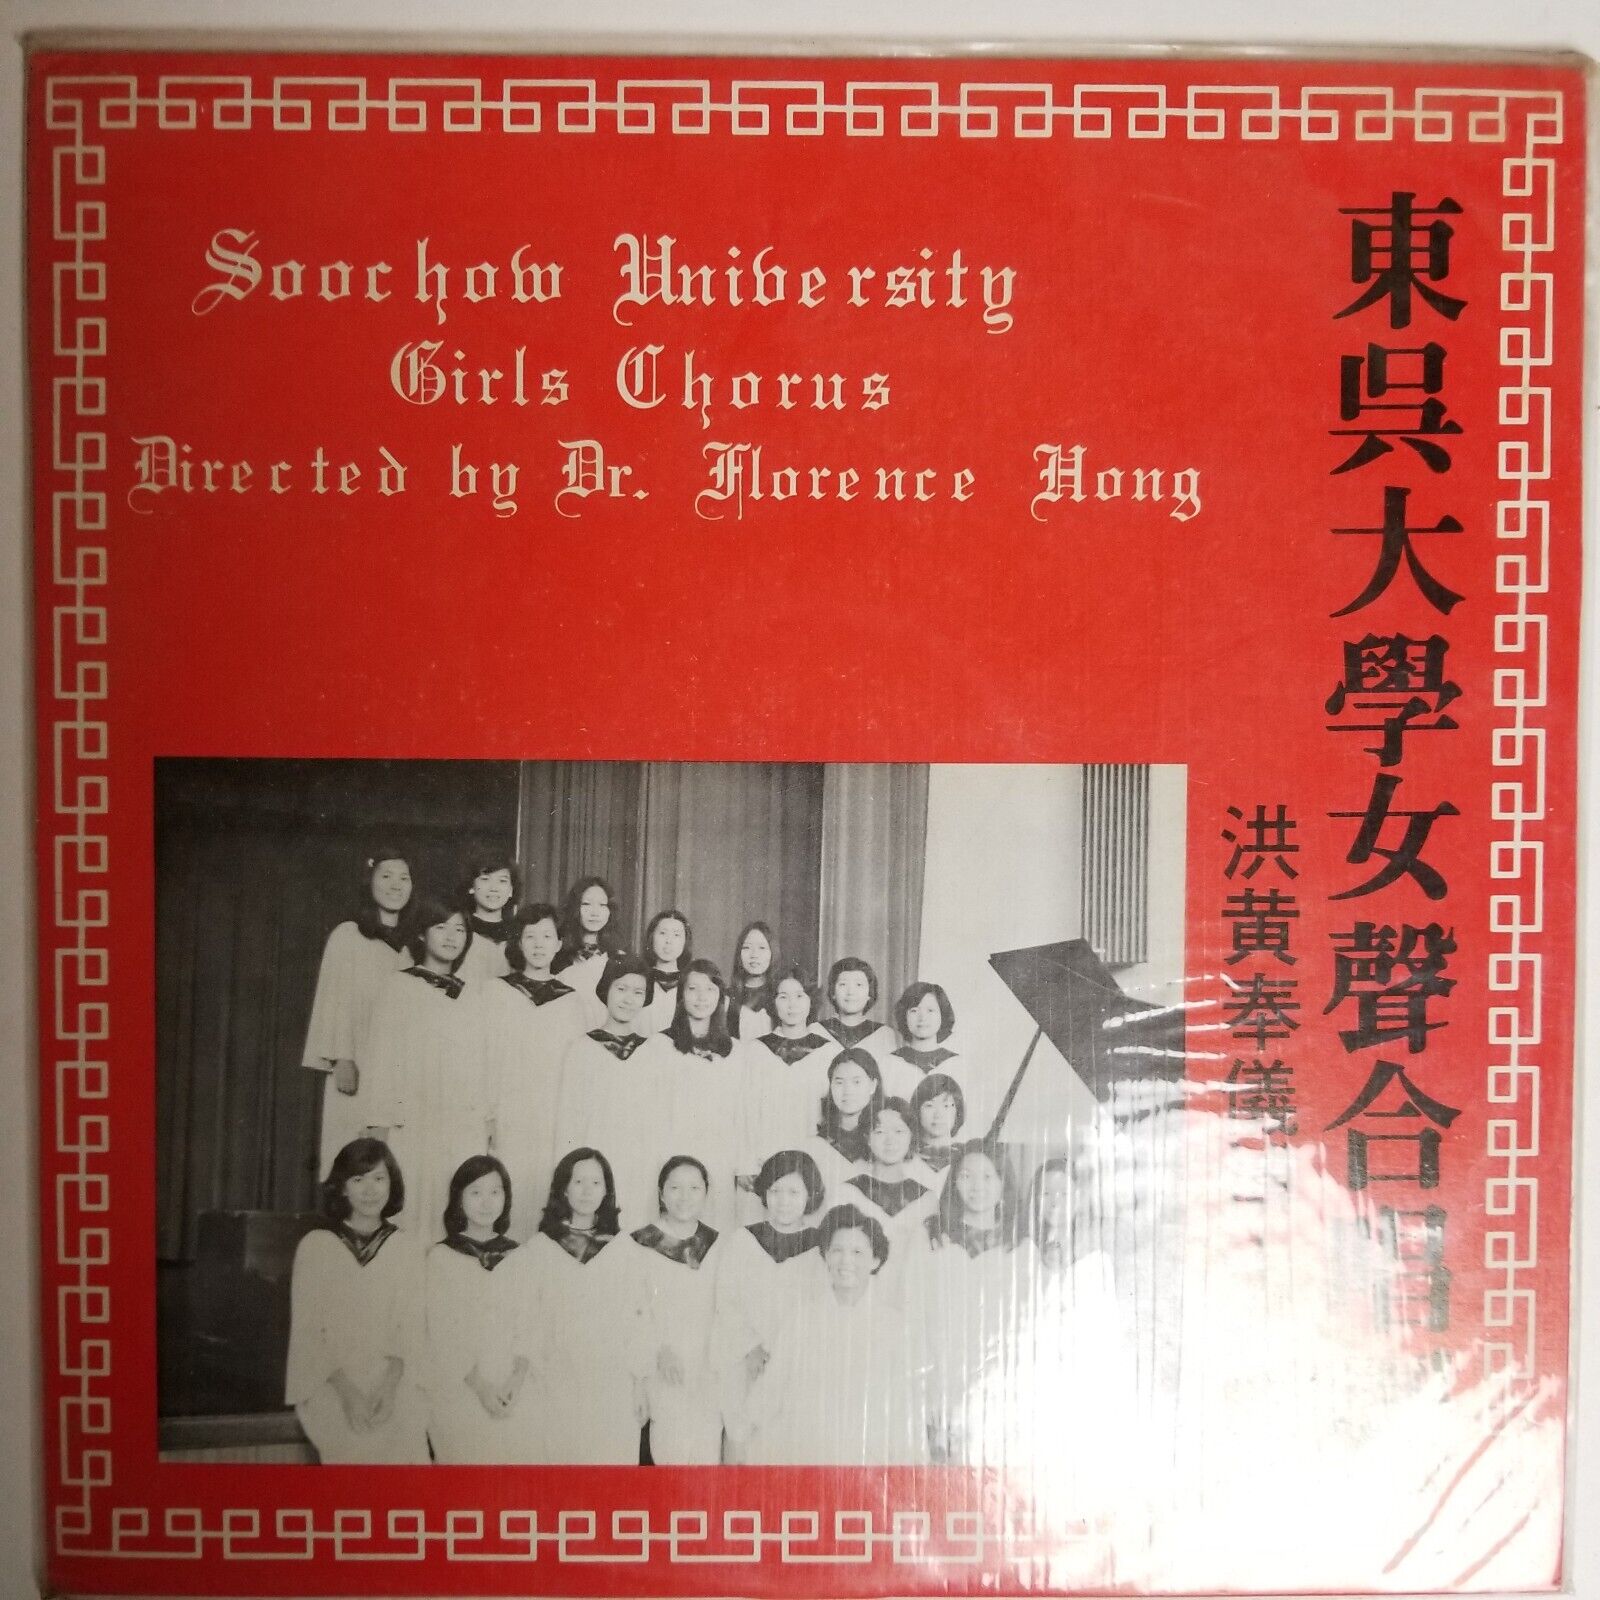 Soochow University Girls Chorus Directed By Dr. Florence Hong LP Sealed